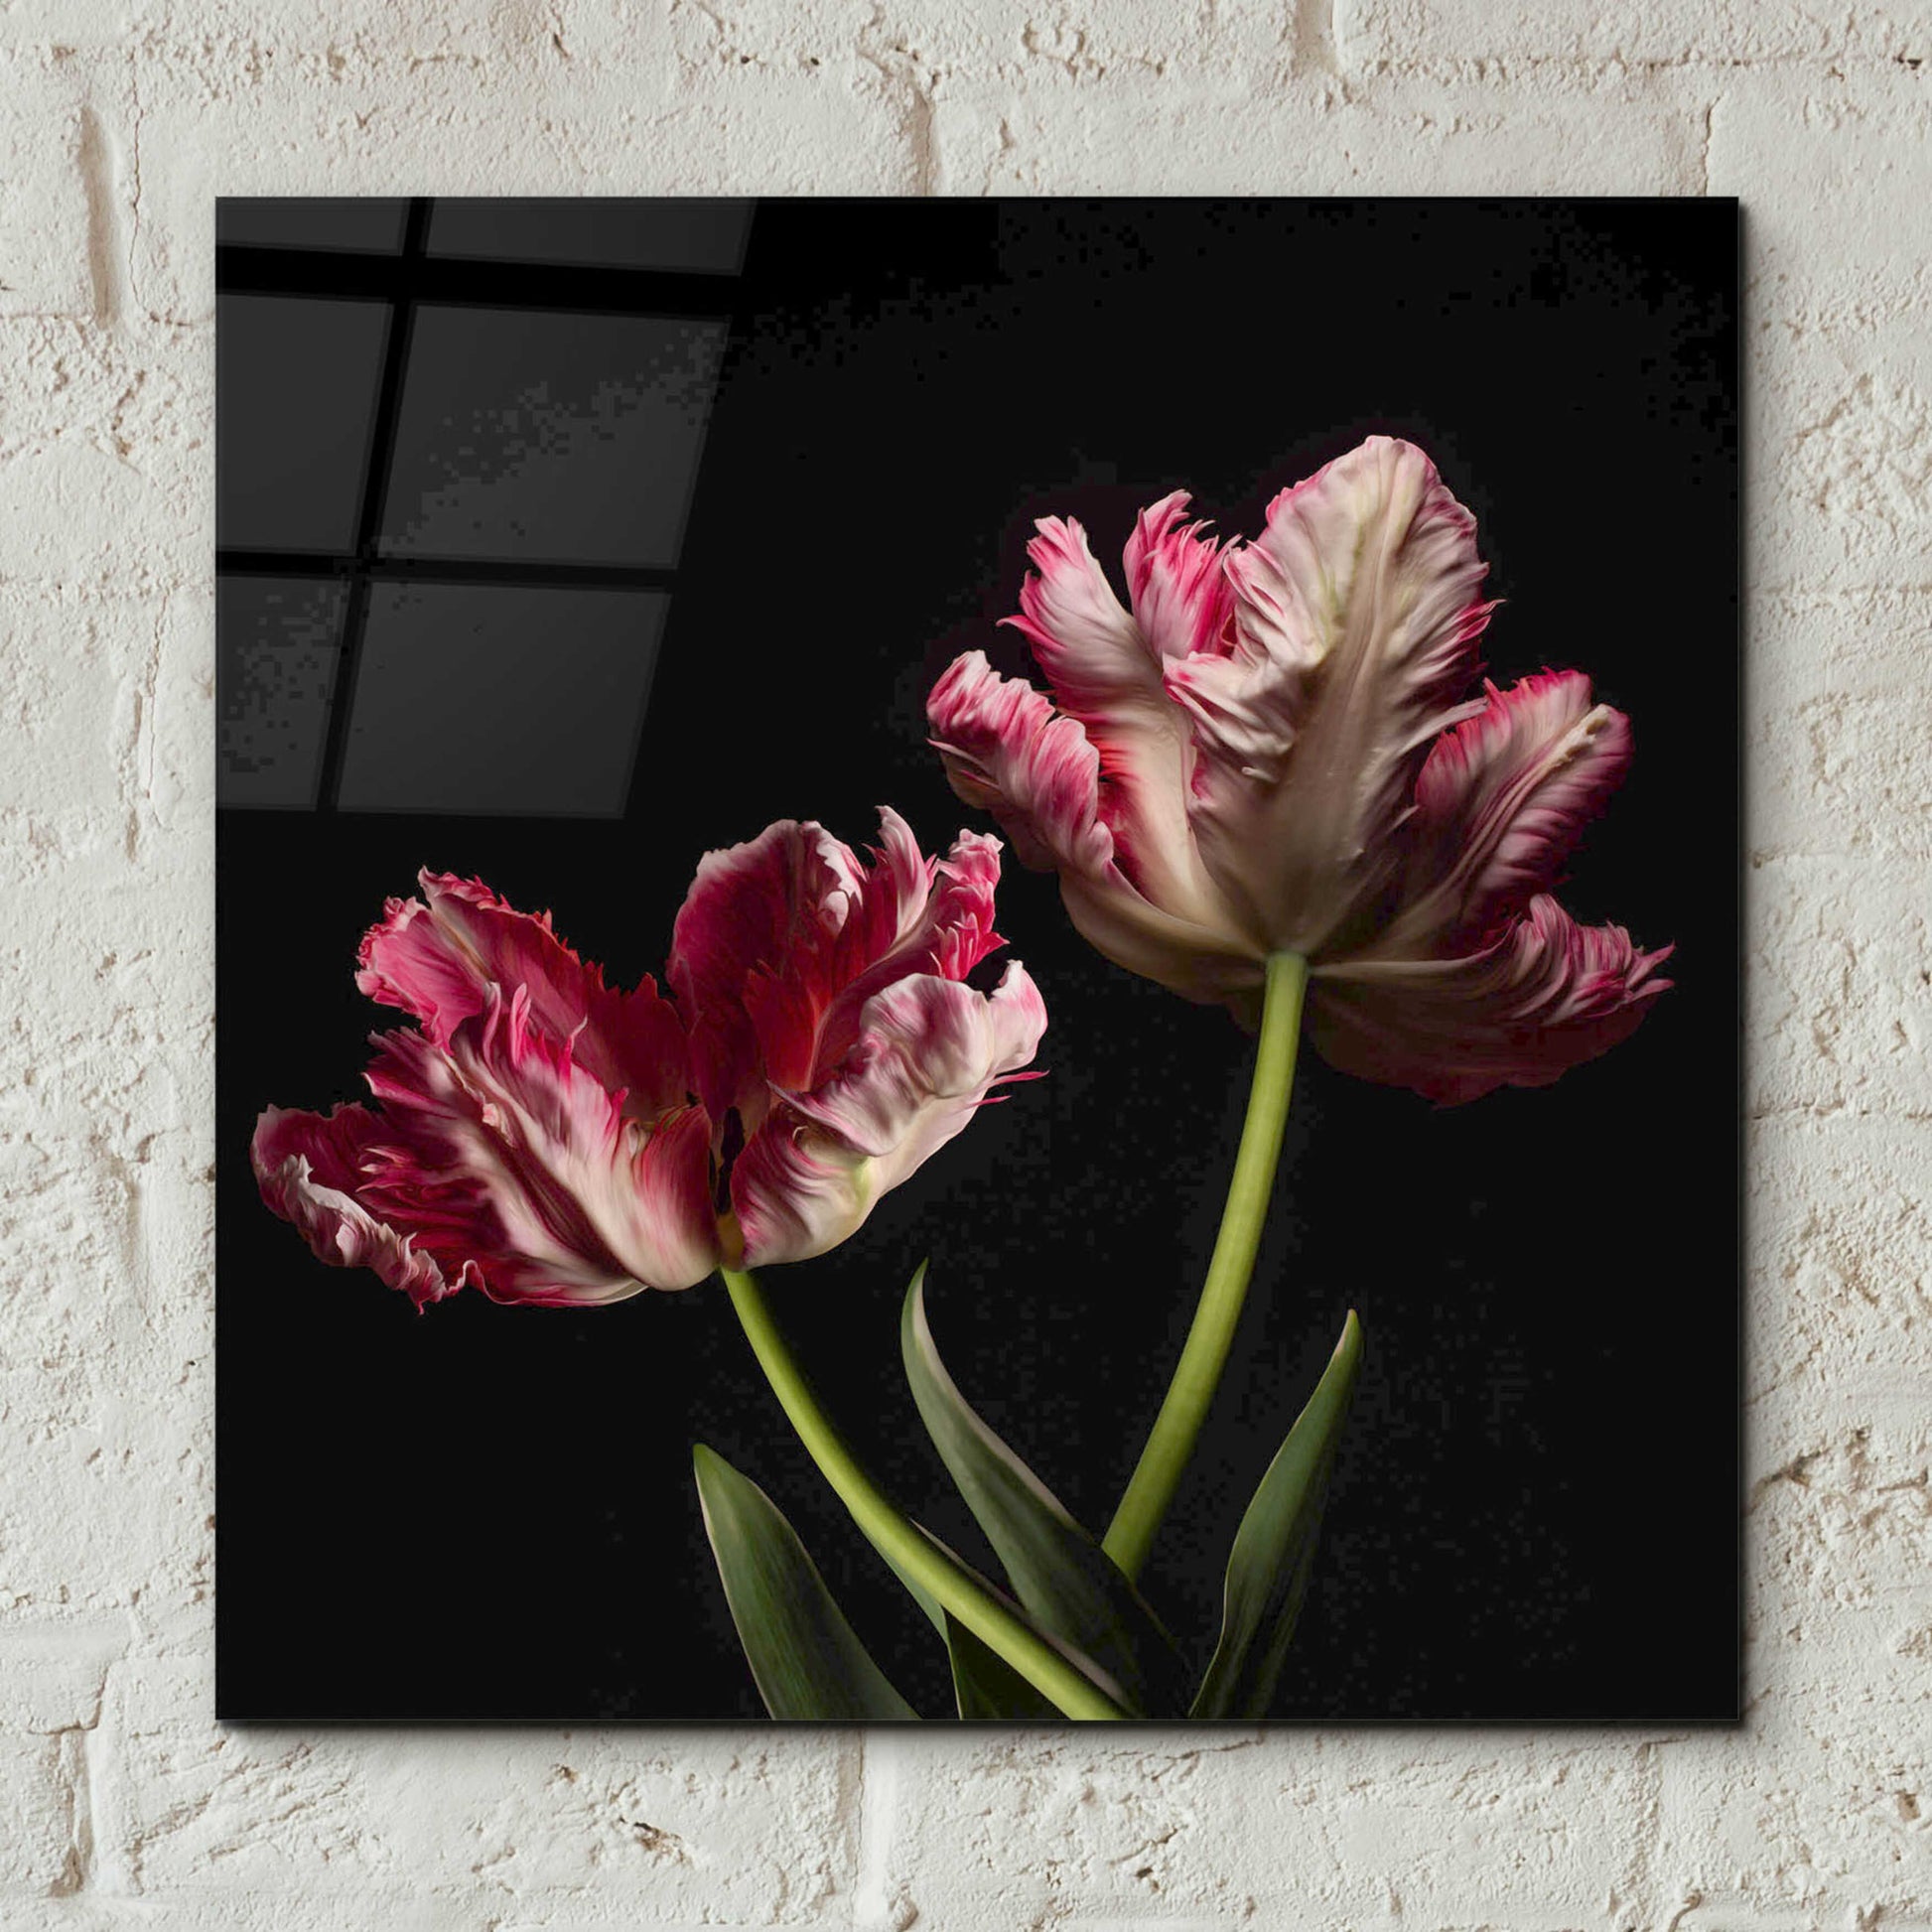 Epic Art 'Open Bloomed Tulips' by Leah McLean, Acrylic Glass Wall Art,12x12